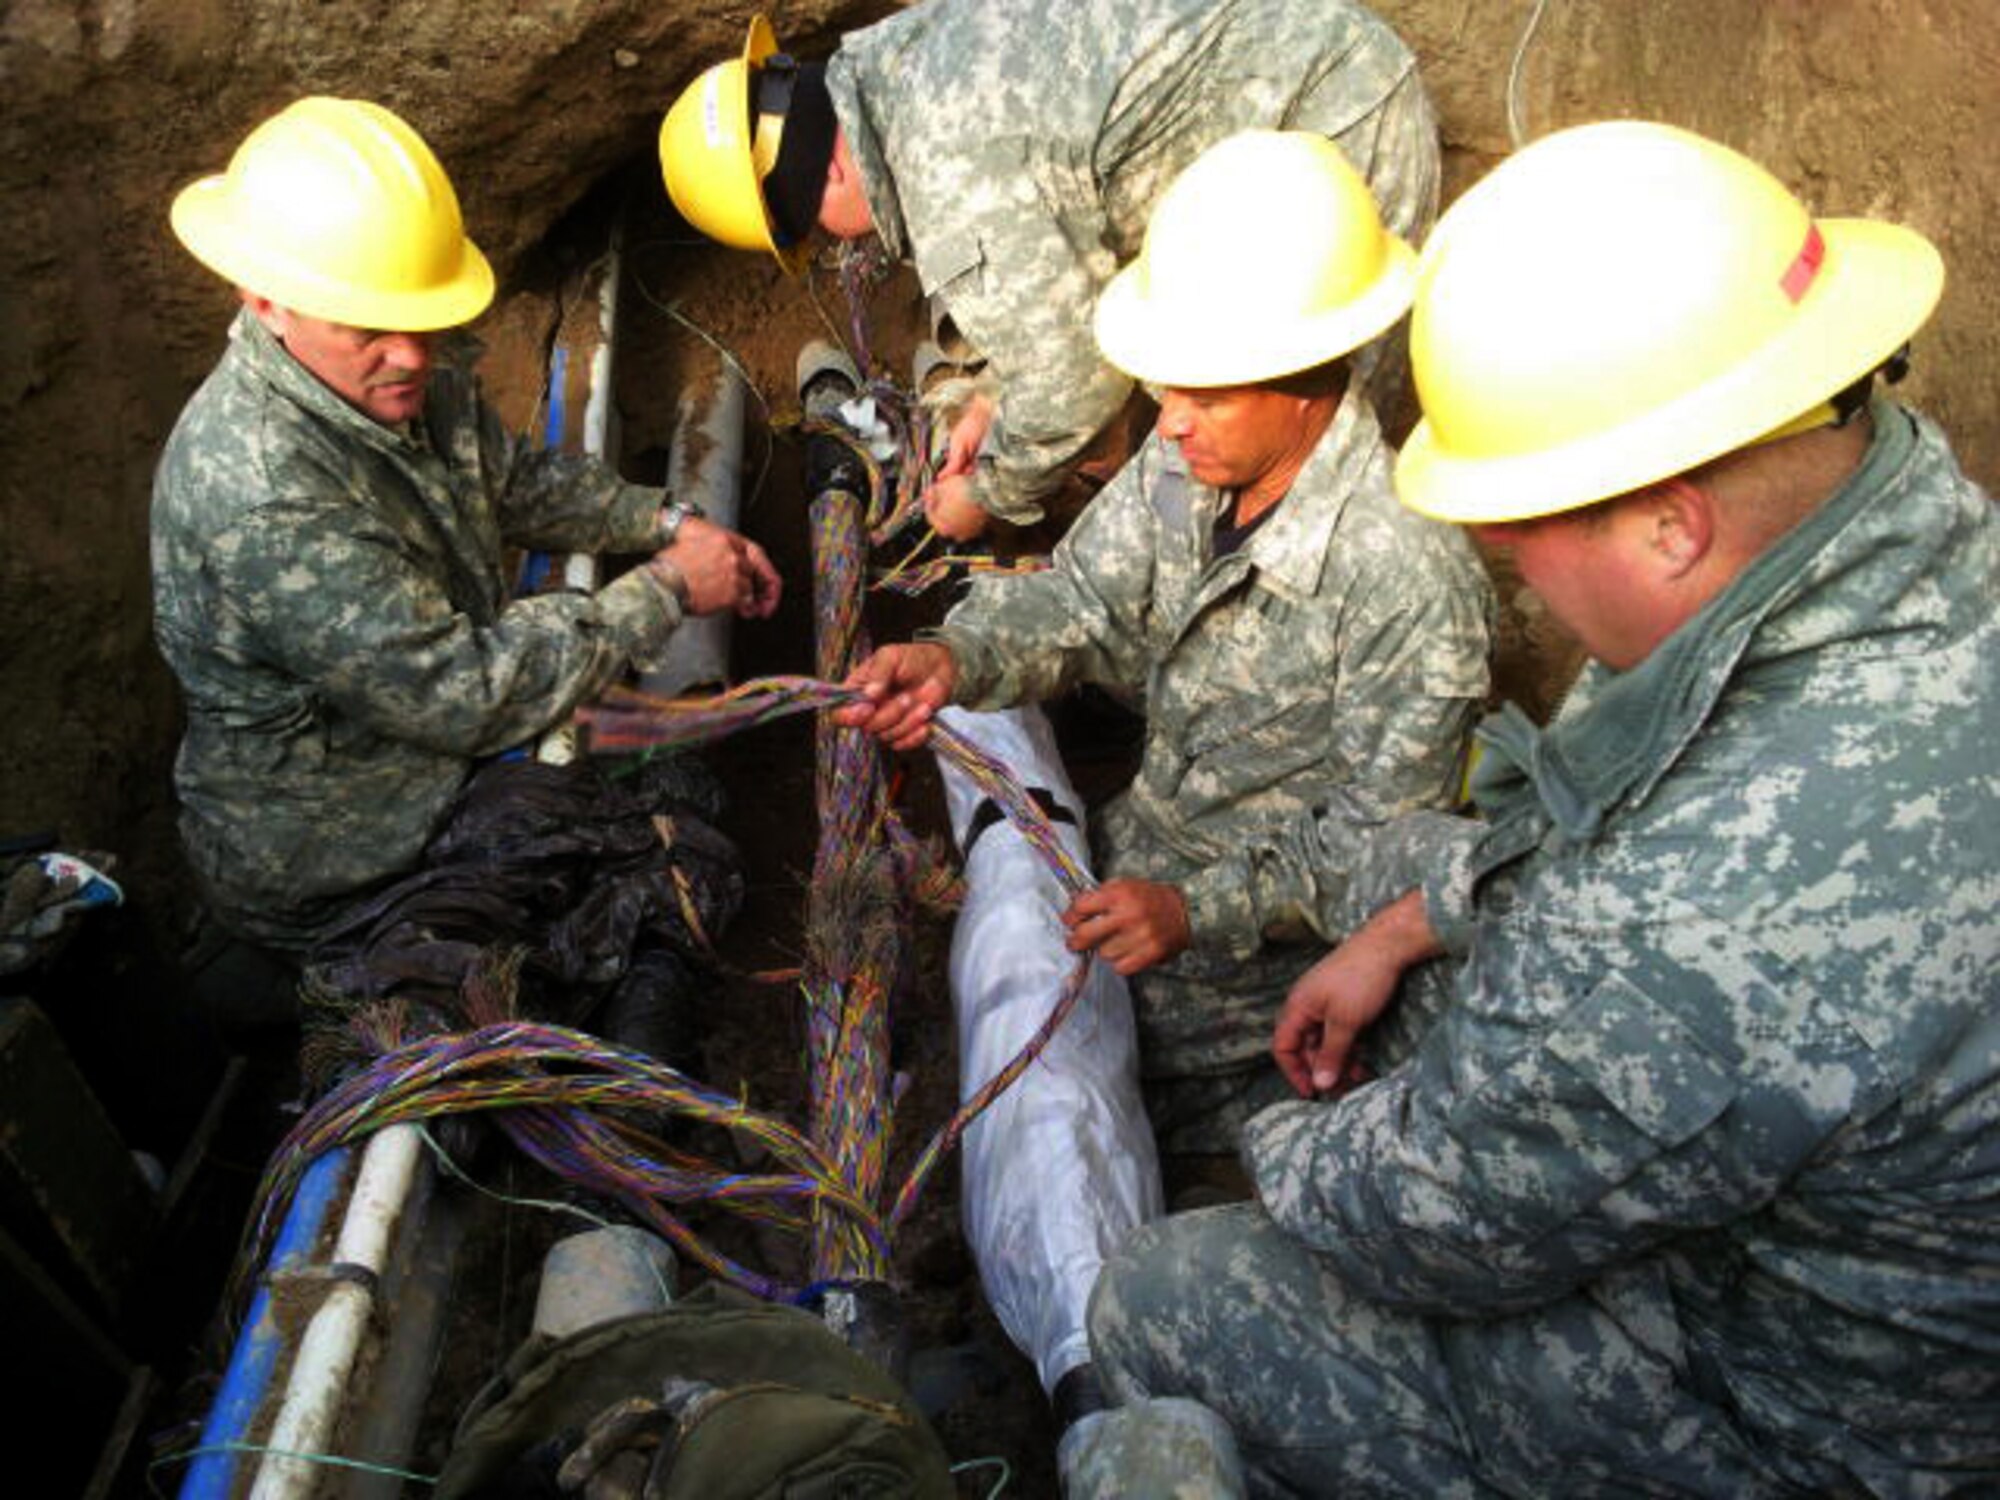 Members of the 130th Engineering Installation Squadron repair three major cables containing over 8,000 phone lines at Mountain Home Air Force Base, Idaho. They recently responded to an Air Force-wide call for emergency assistance to repair the cables  after a contractor dug into the base's telephone lines causing them to lose over half of their connections. U.S. Air Force courtesy photo (released).              